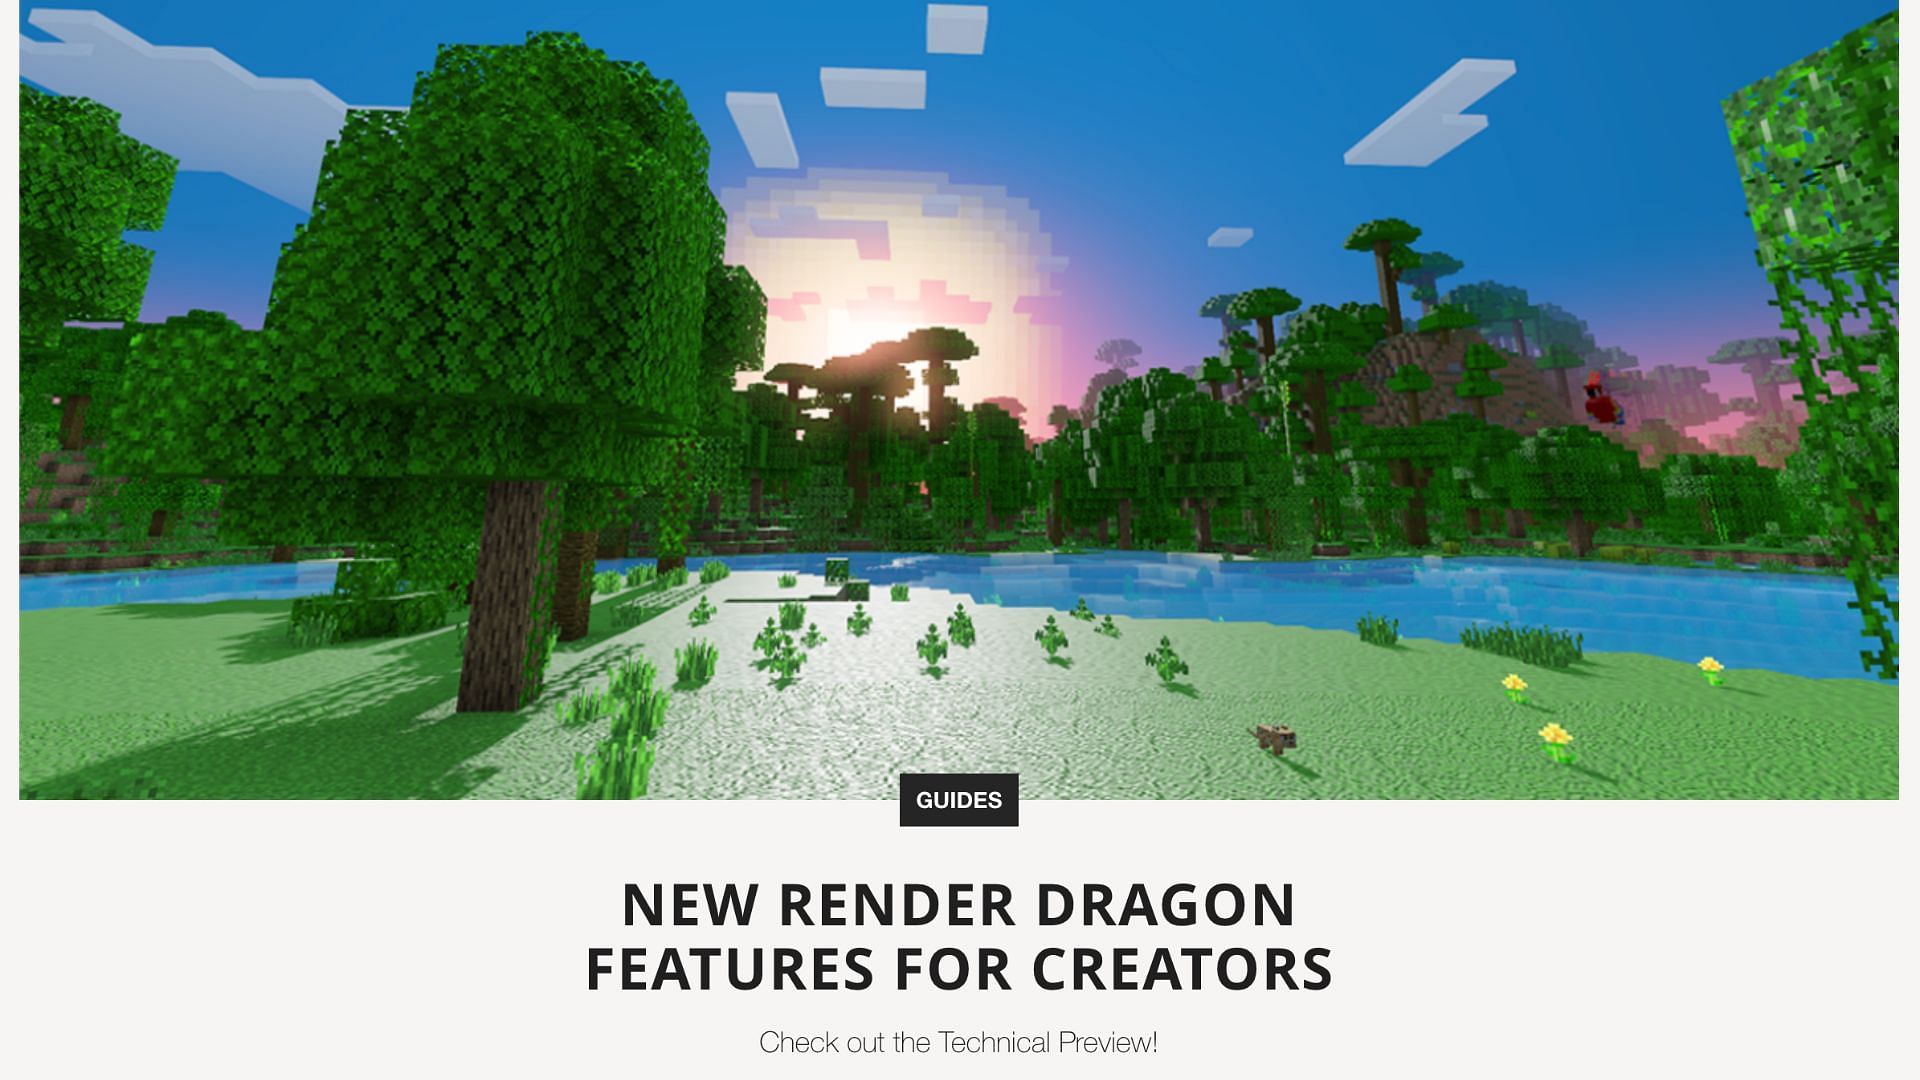 Minecraft Bedrock Edition now has official shader support (Image via Mojang)